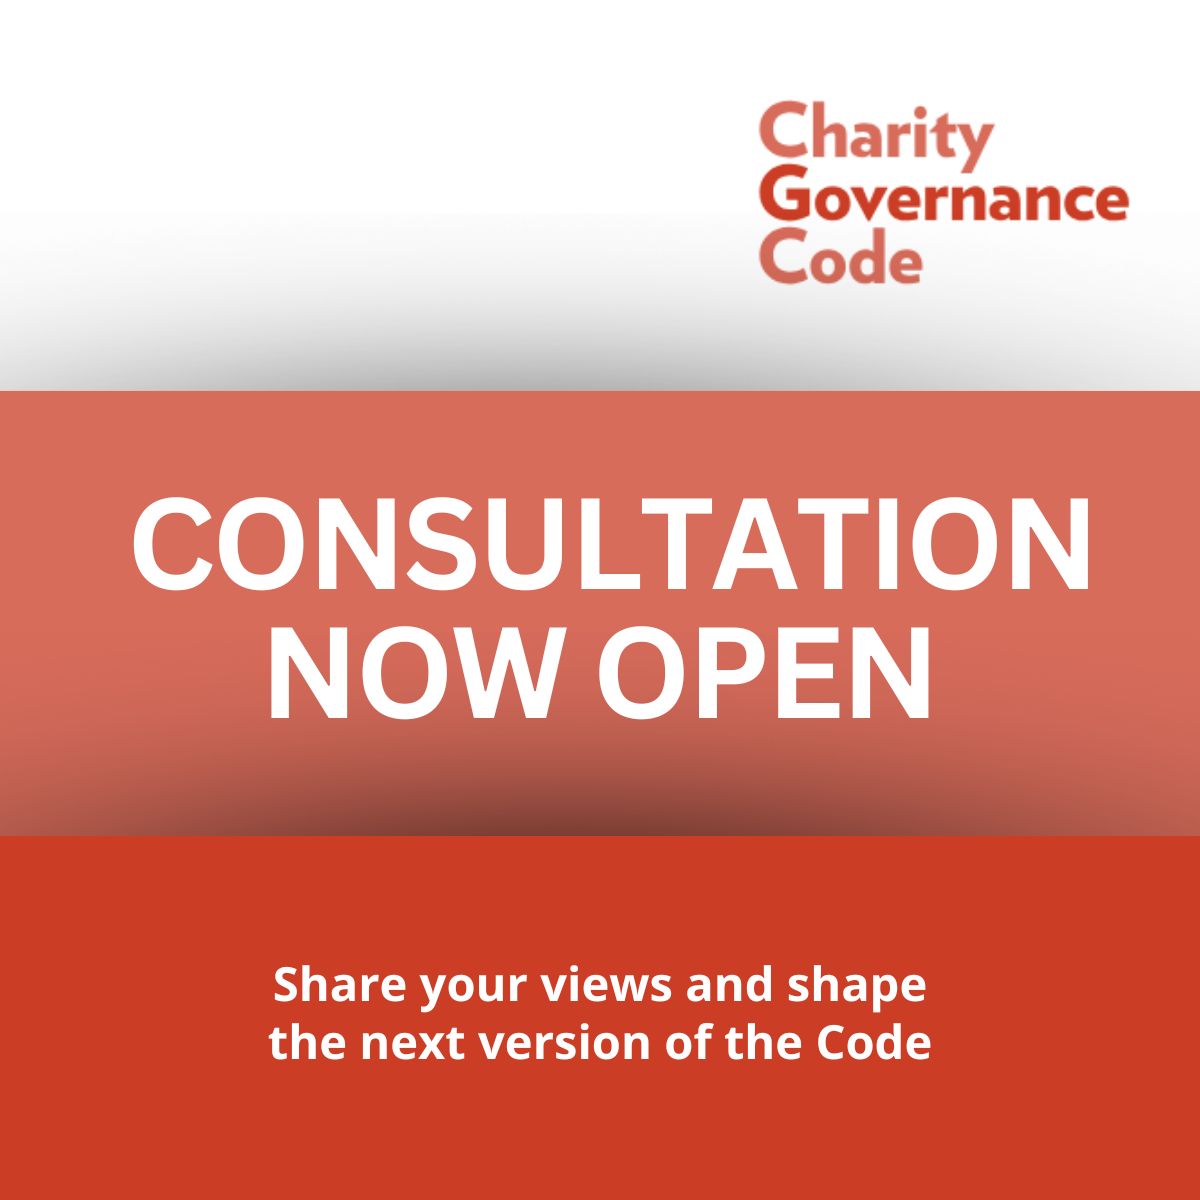 The Charity Governance Code is undergoing an update, and we want to hear from you!
Respond to our consultation: eu.surveymonkey.com/r/KXXYKVK
In doing so, you can help us make the Code as practical and accessible as possible, and support good #Governance across the #CharitySector.